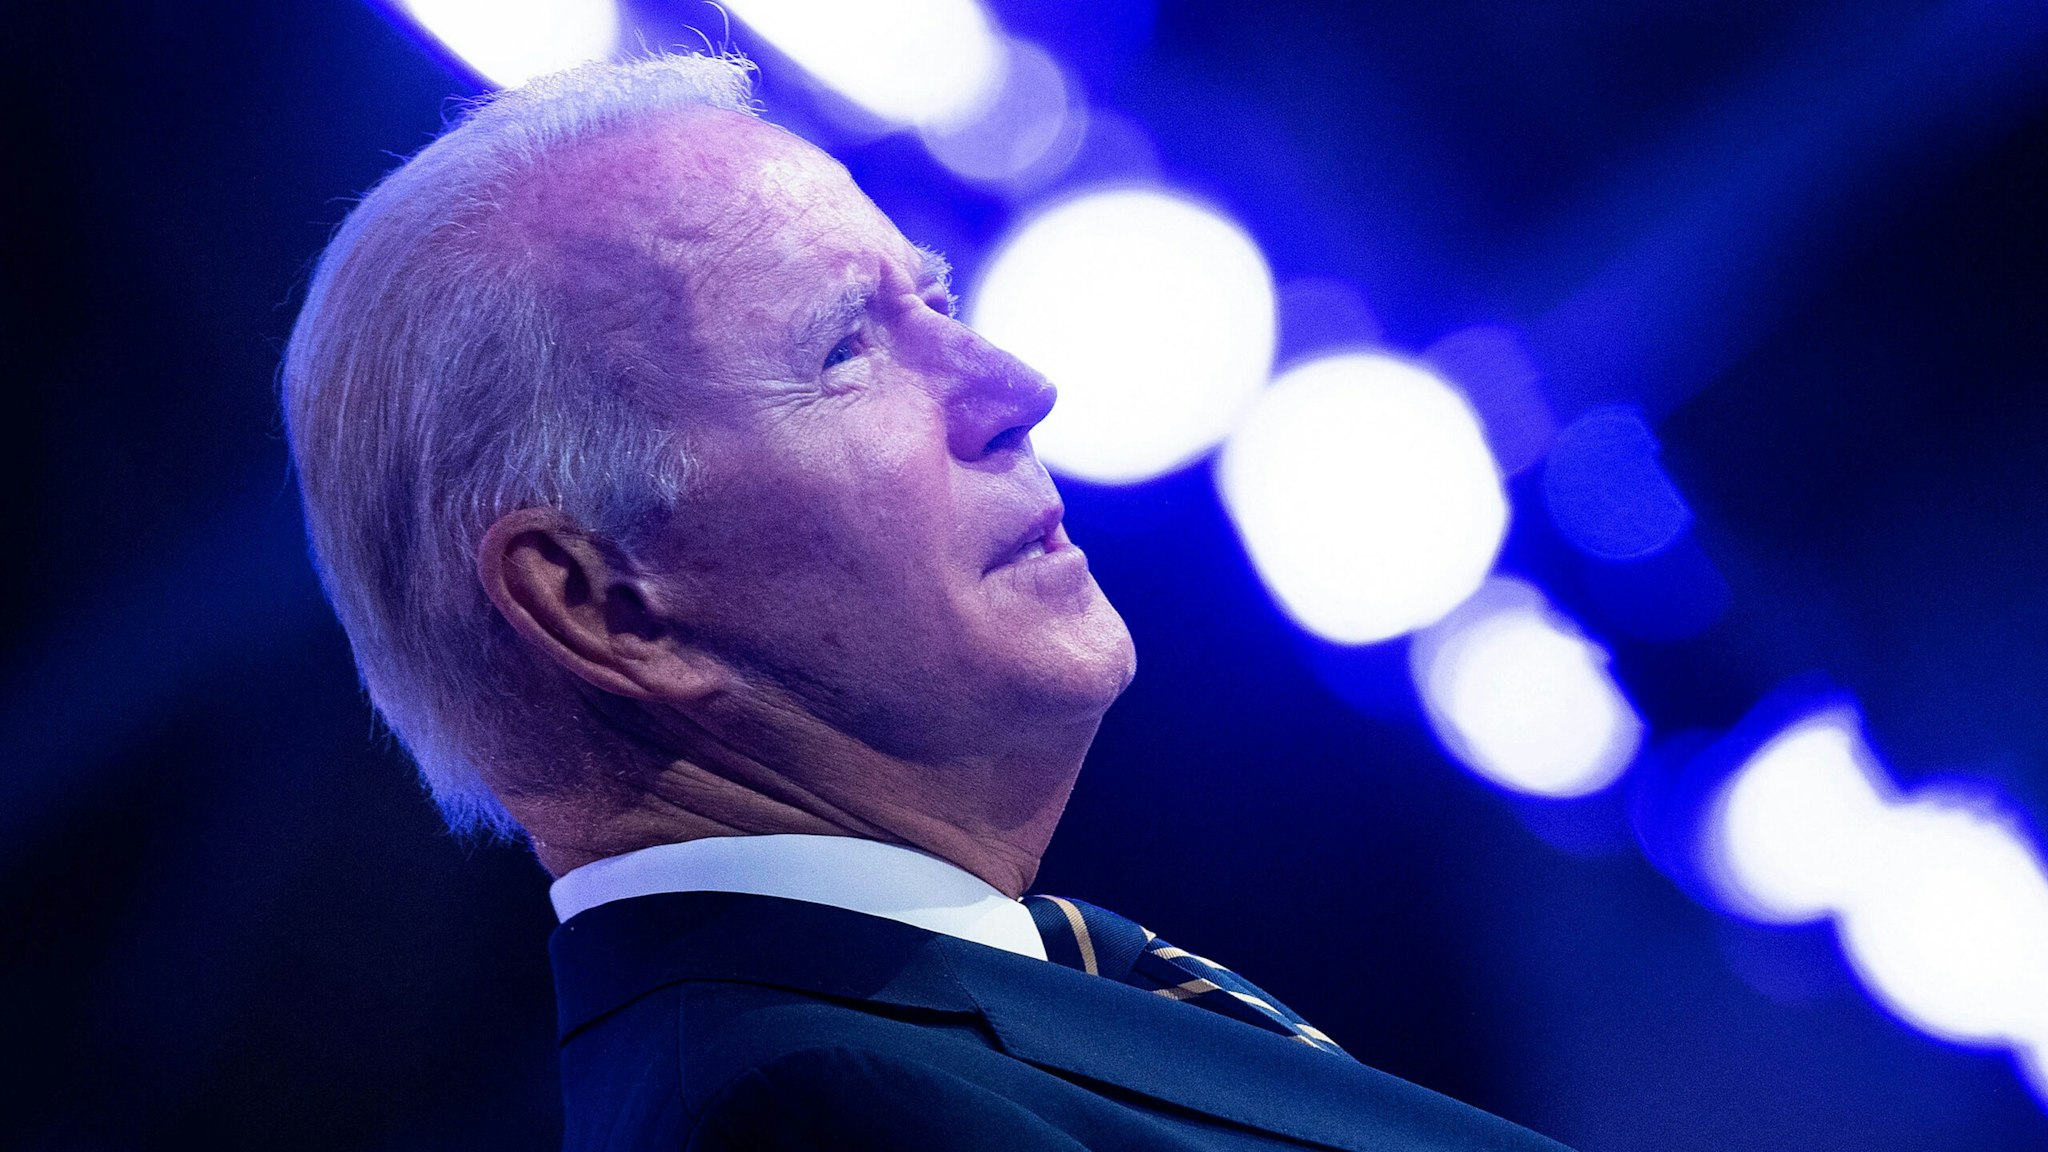 US President Joe Biden delivers a speech on stage during a meeting at the COP26 UN Climate Change Conference in Glasgow, Scotland, on November 1, 2021. - COP26, running from October 31 to November 12 in Glasgow will be the biggest climate conference since the 2015 Paris summit and is seen as crucial in setting worldwide emission targets to slow global warming, as well as firming up other key commitments